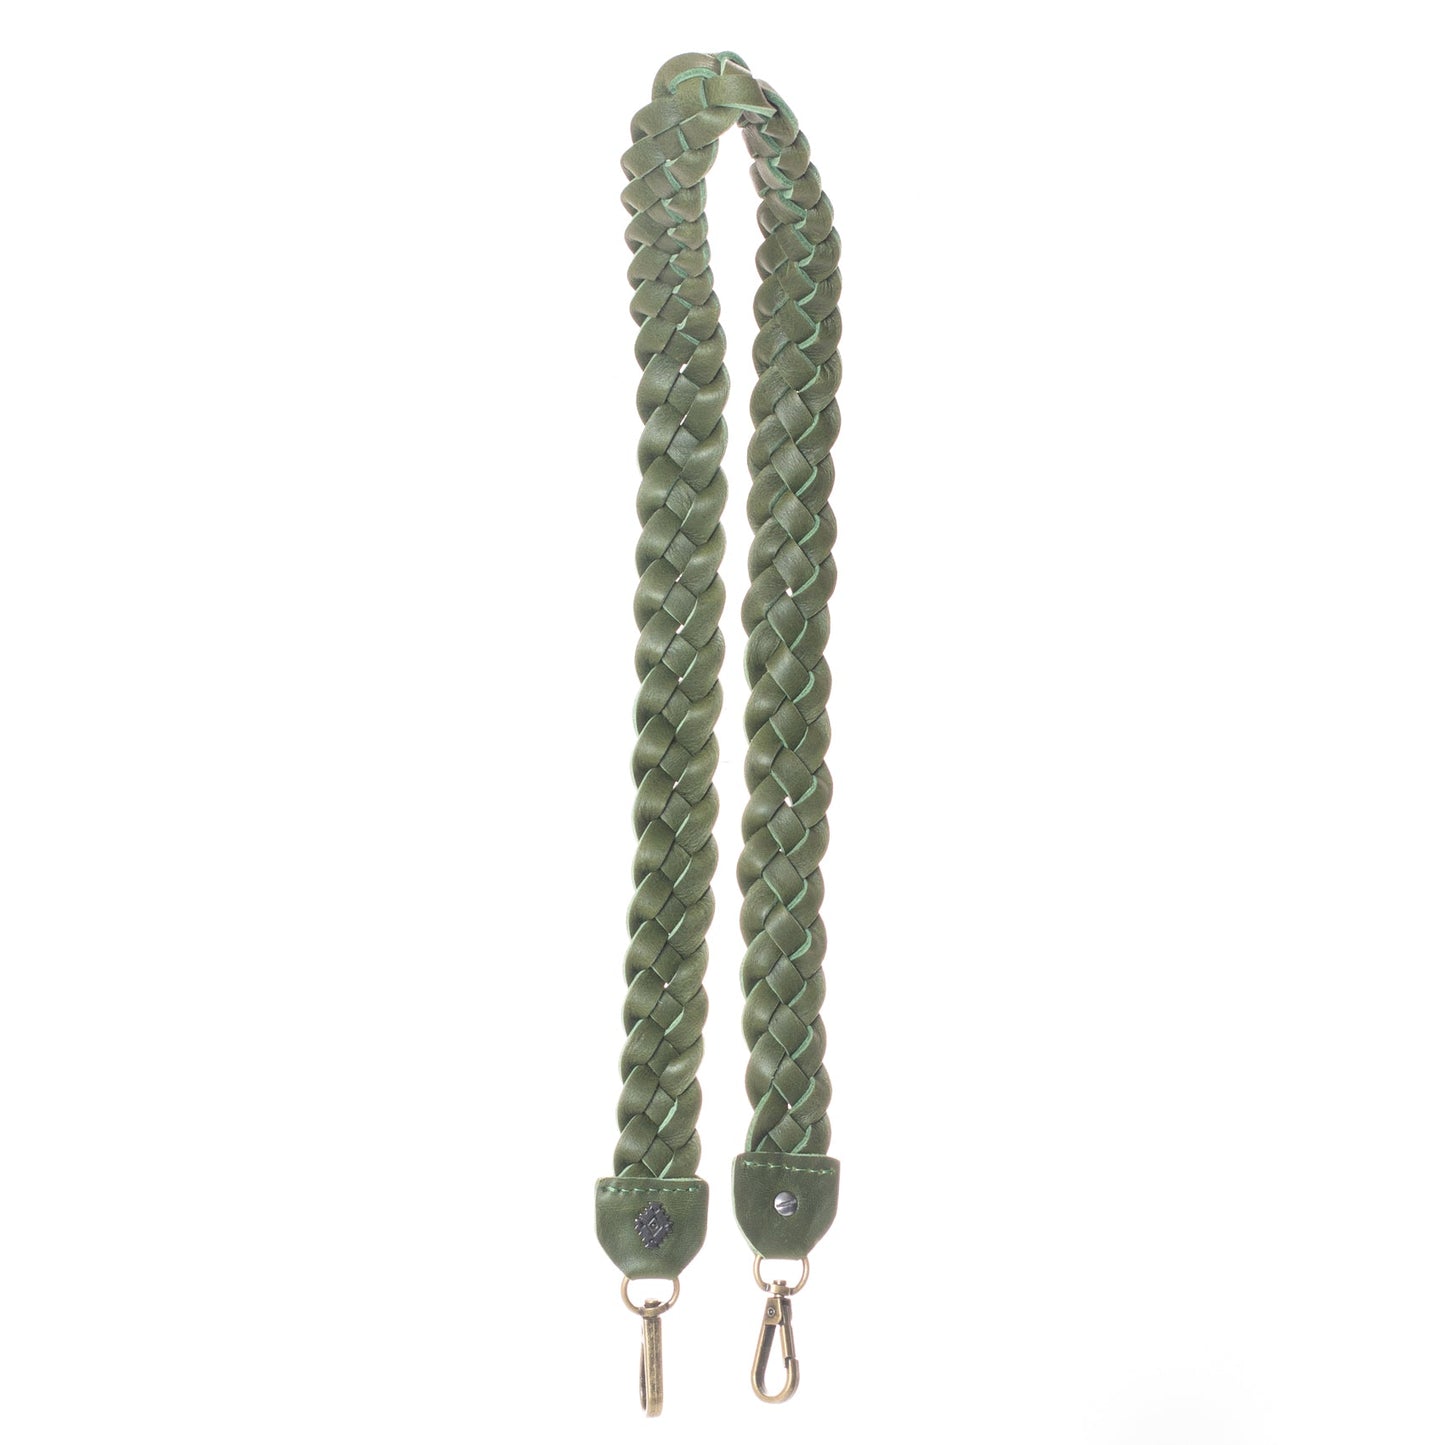 BRAIDED CROSS BODY STRAP - ARTISAN COLLECTION - FULL LEATHER - DEEP EMERALD